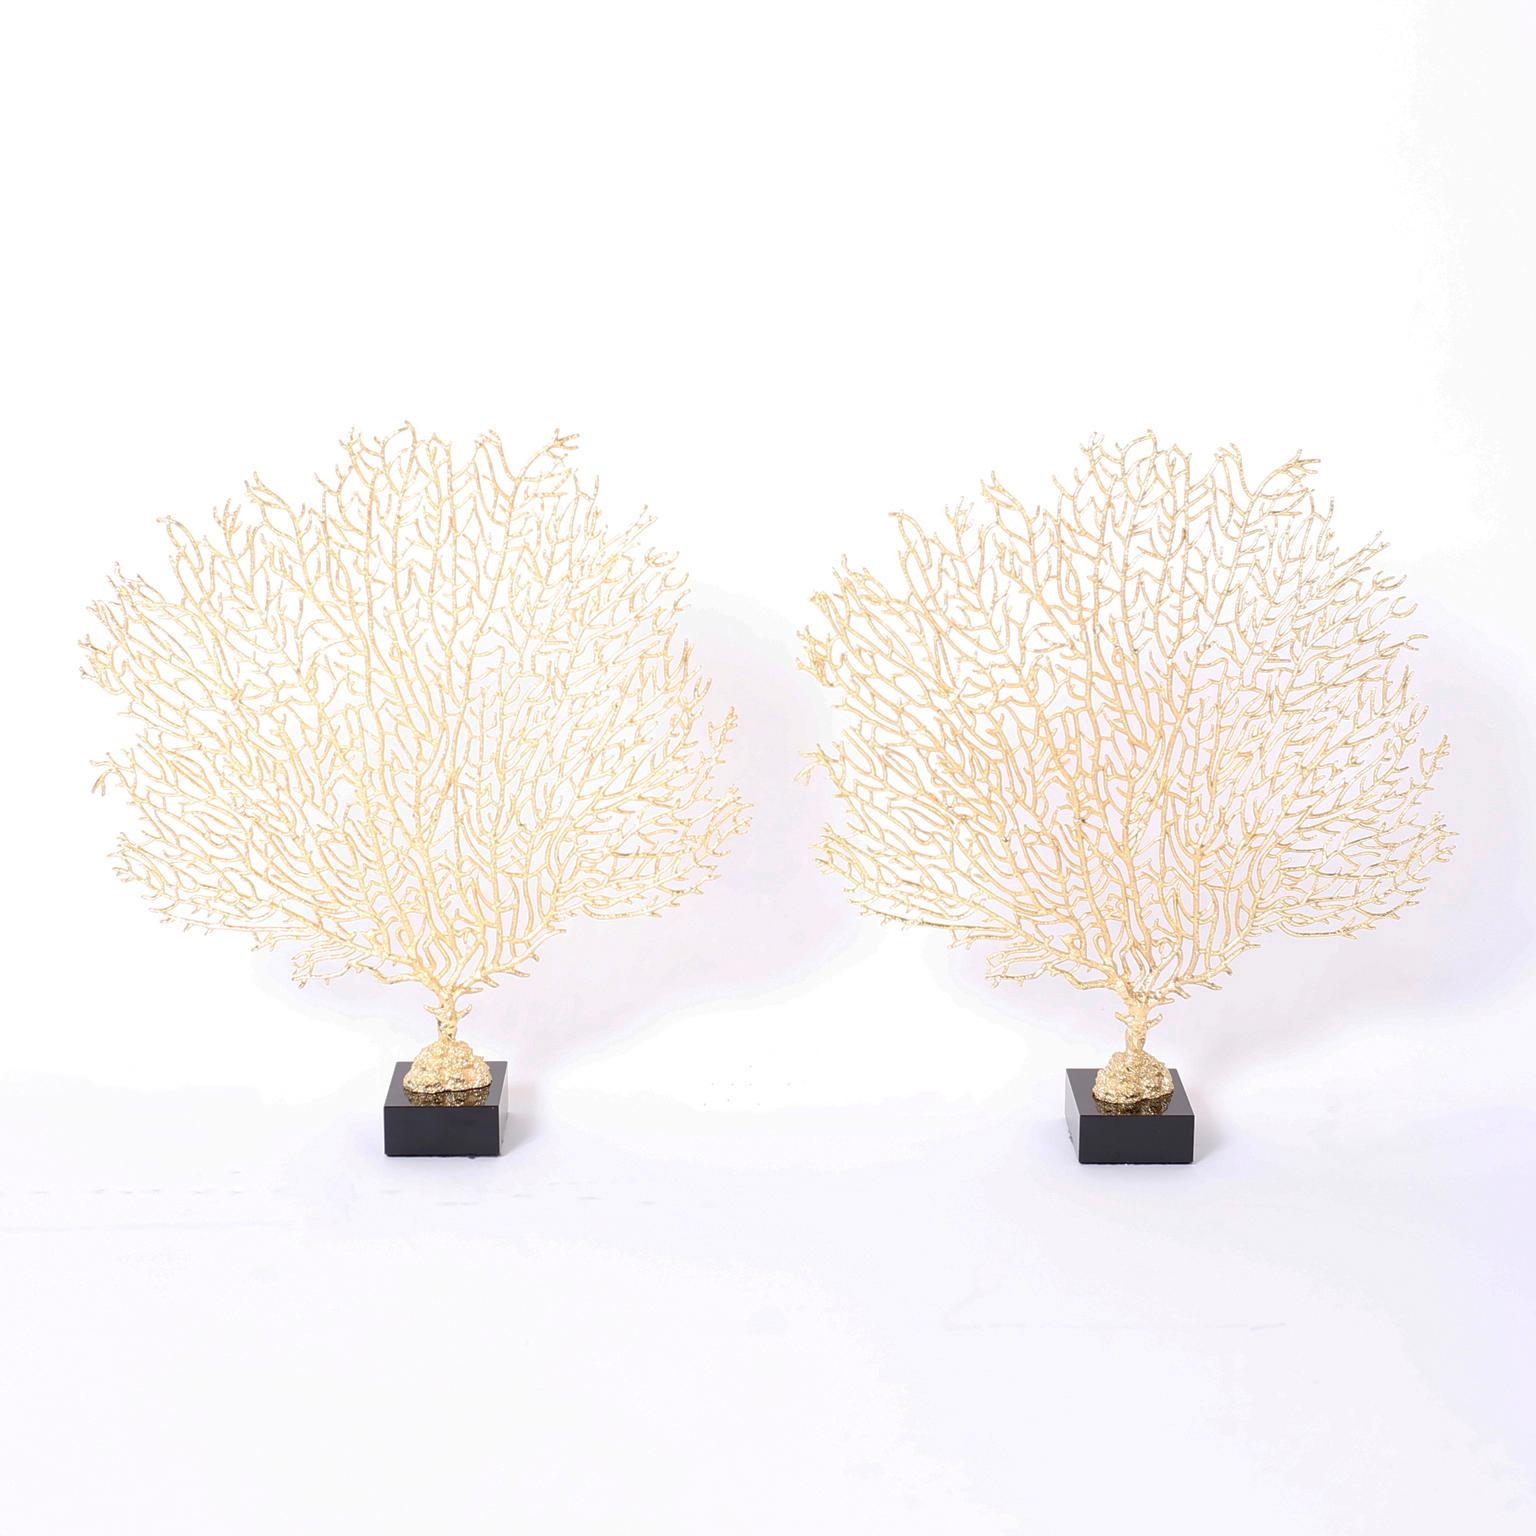 Dramatic pair of midcentury cast metal sea fans with their iconic form finished in gold leaf and presented on black glass bases.